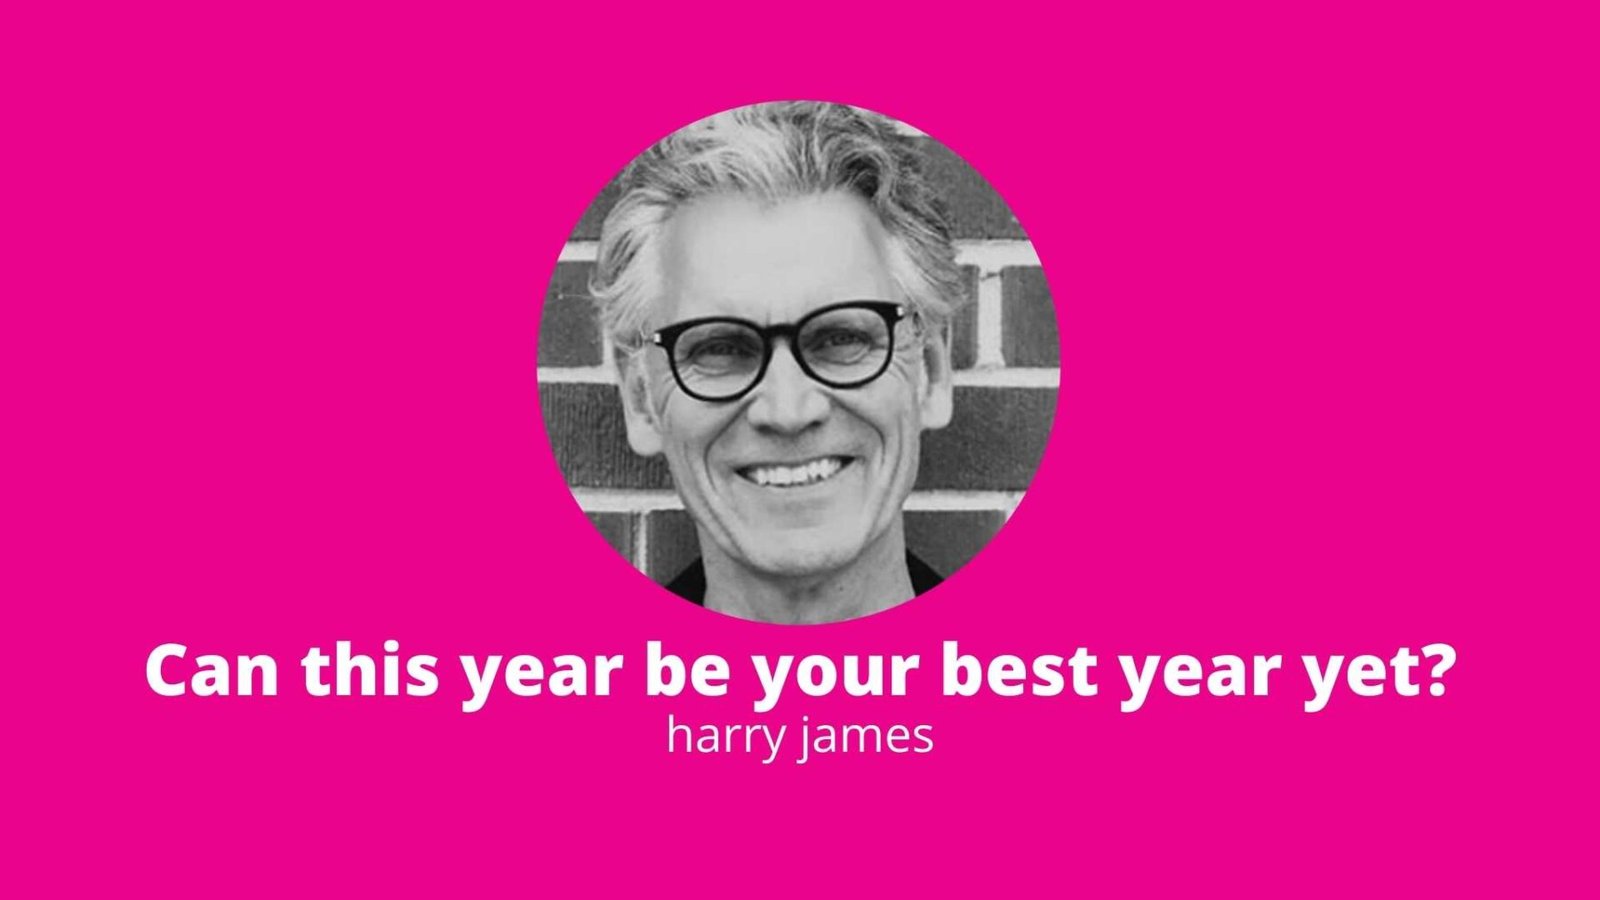 Can this year be your best year yet?